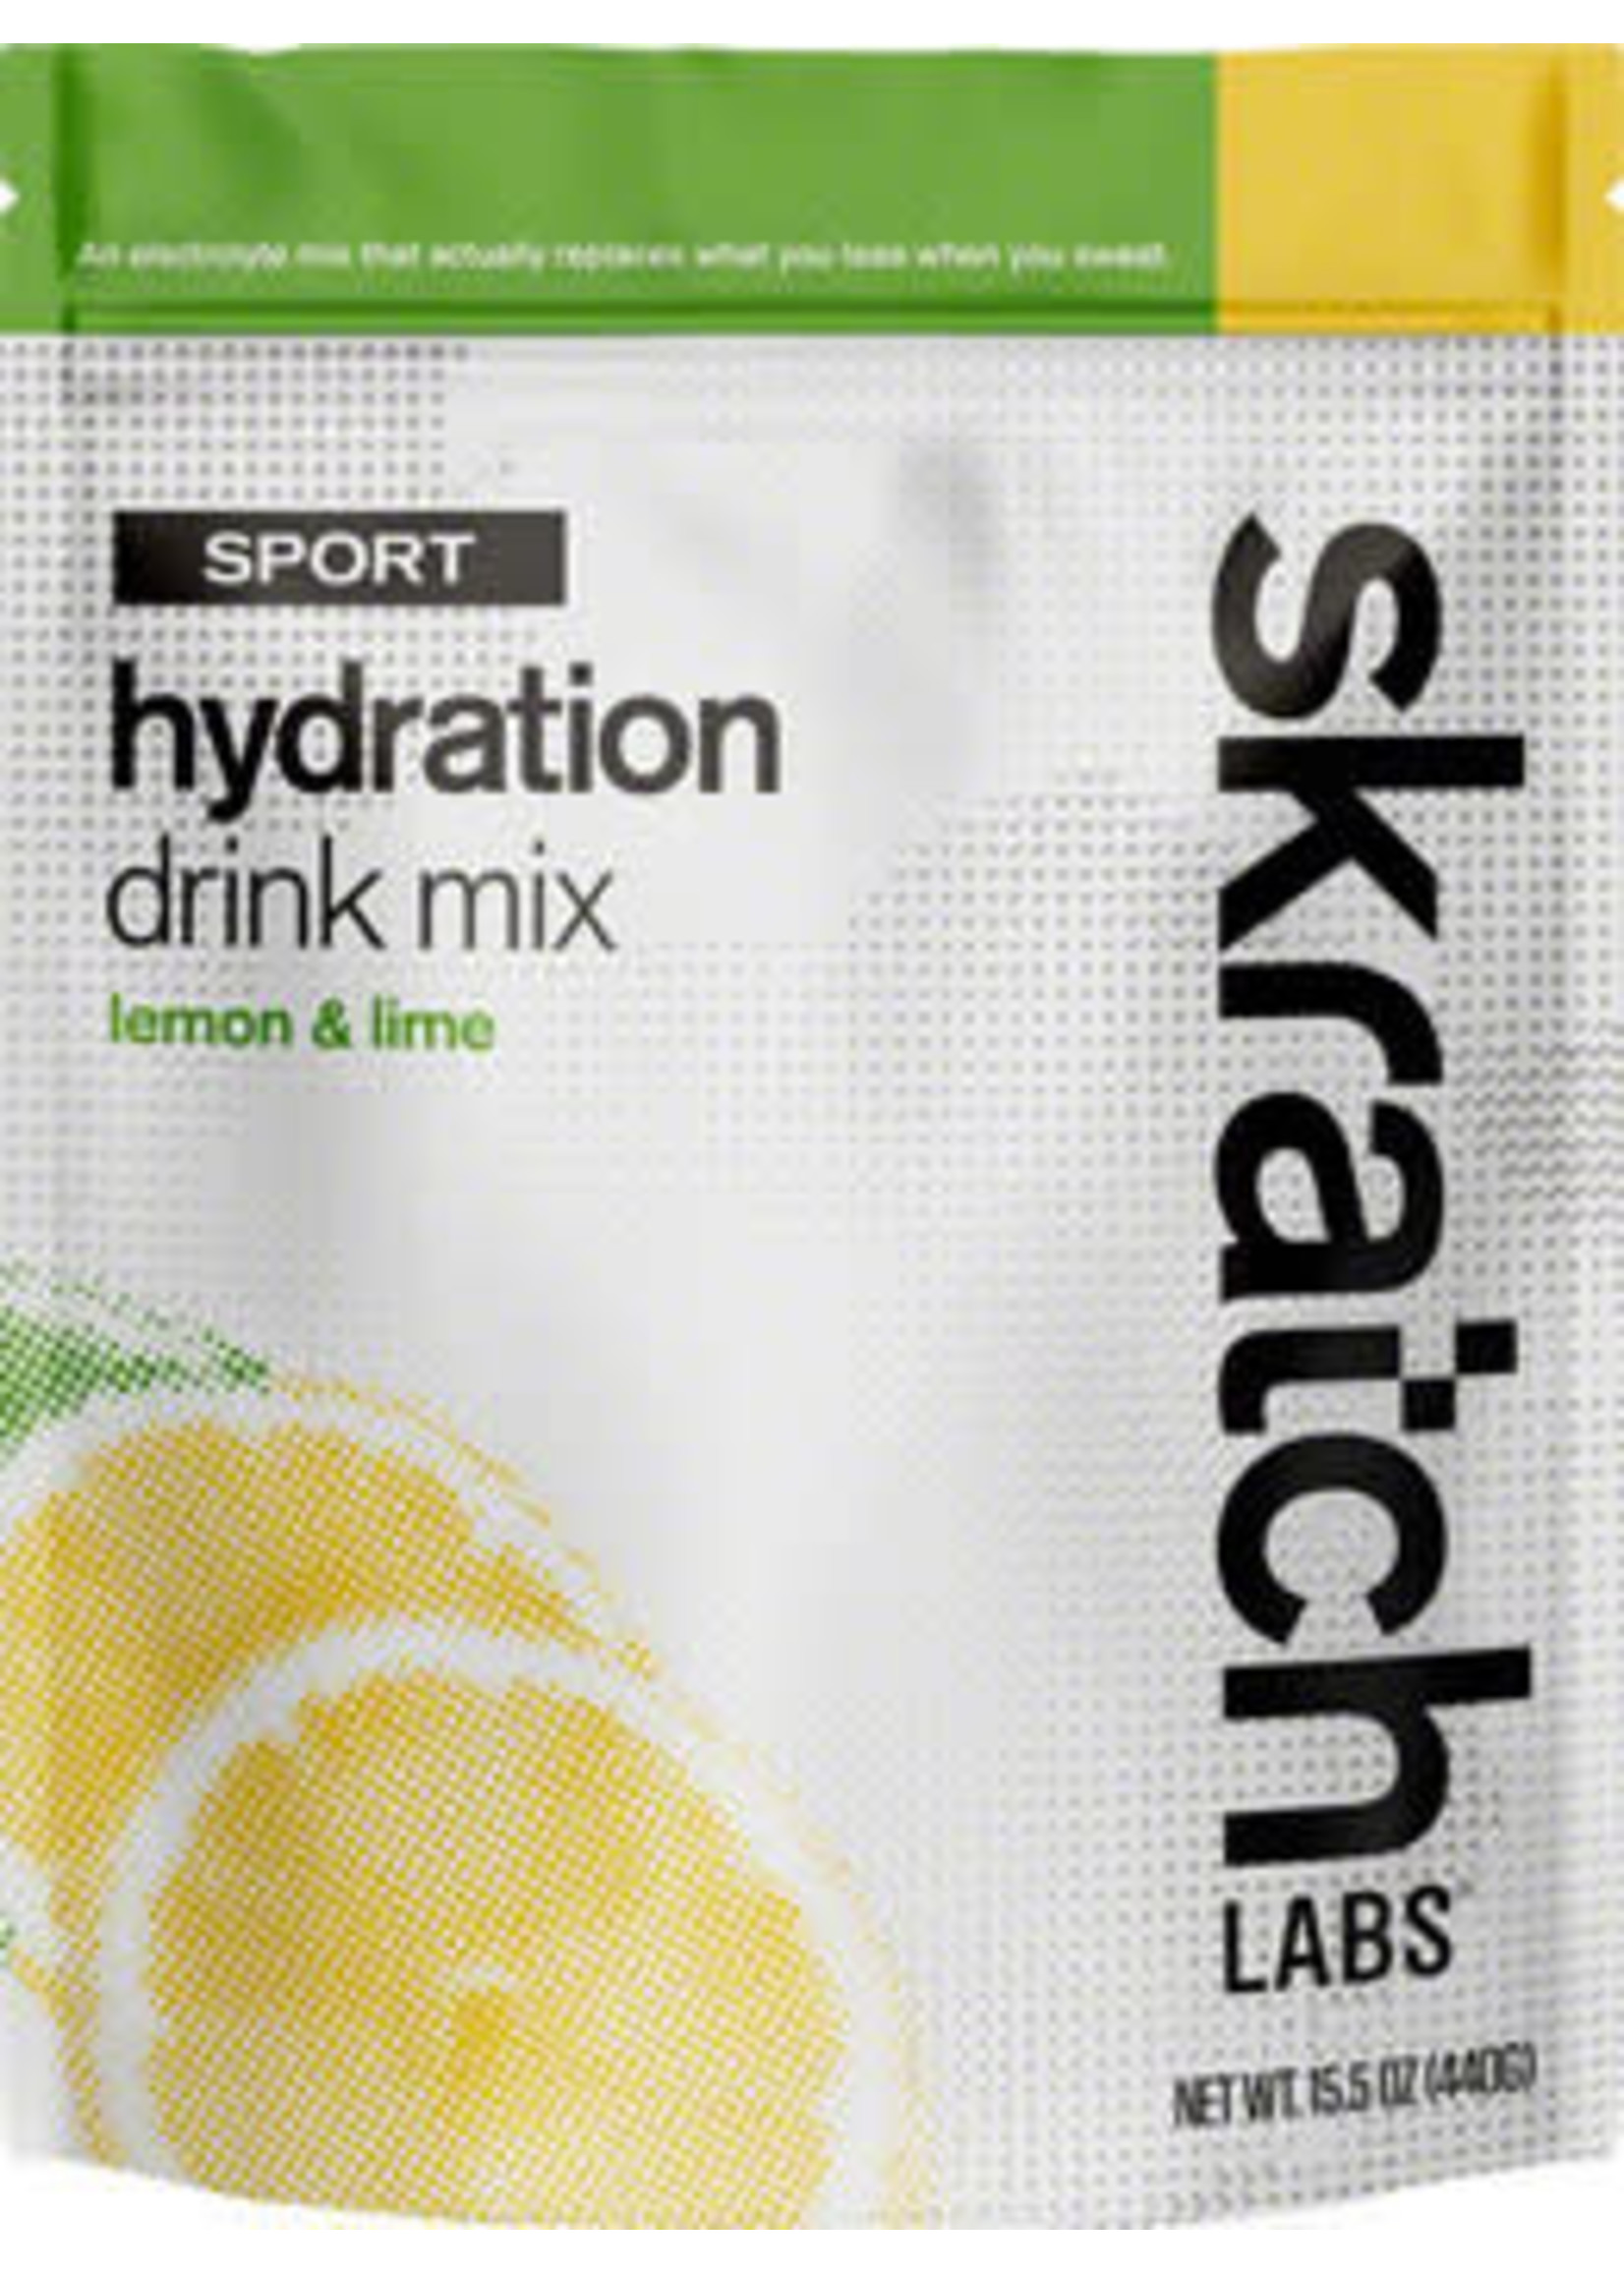 Skratch Skratch Labs Sport Hydration Drink Mix: Green Tea and Lemon, 20-Serving Resealable Pouch